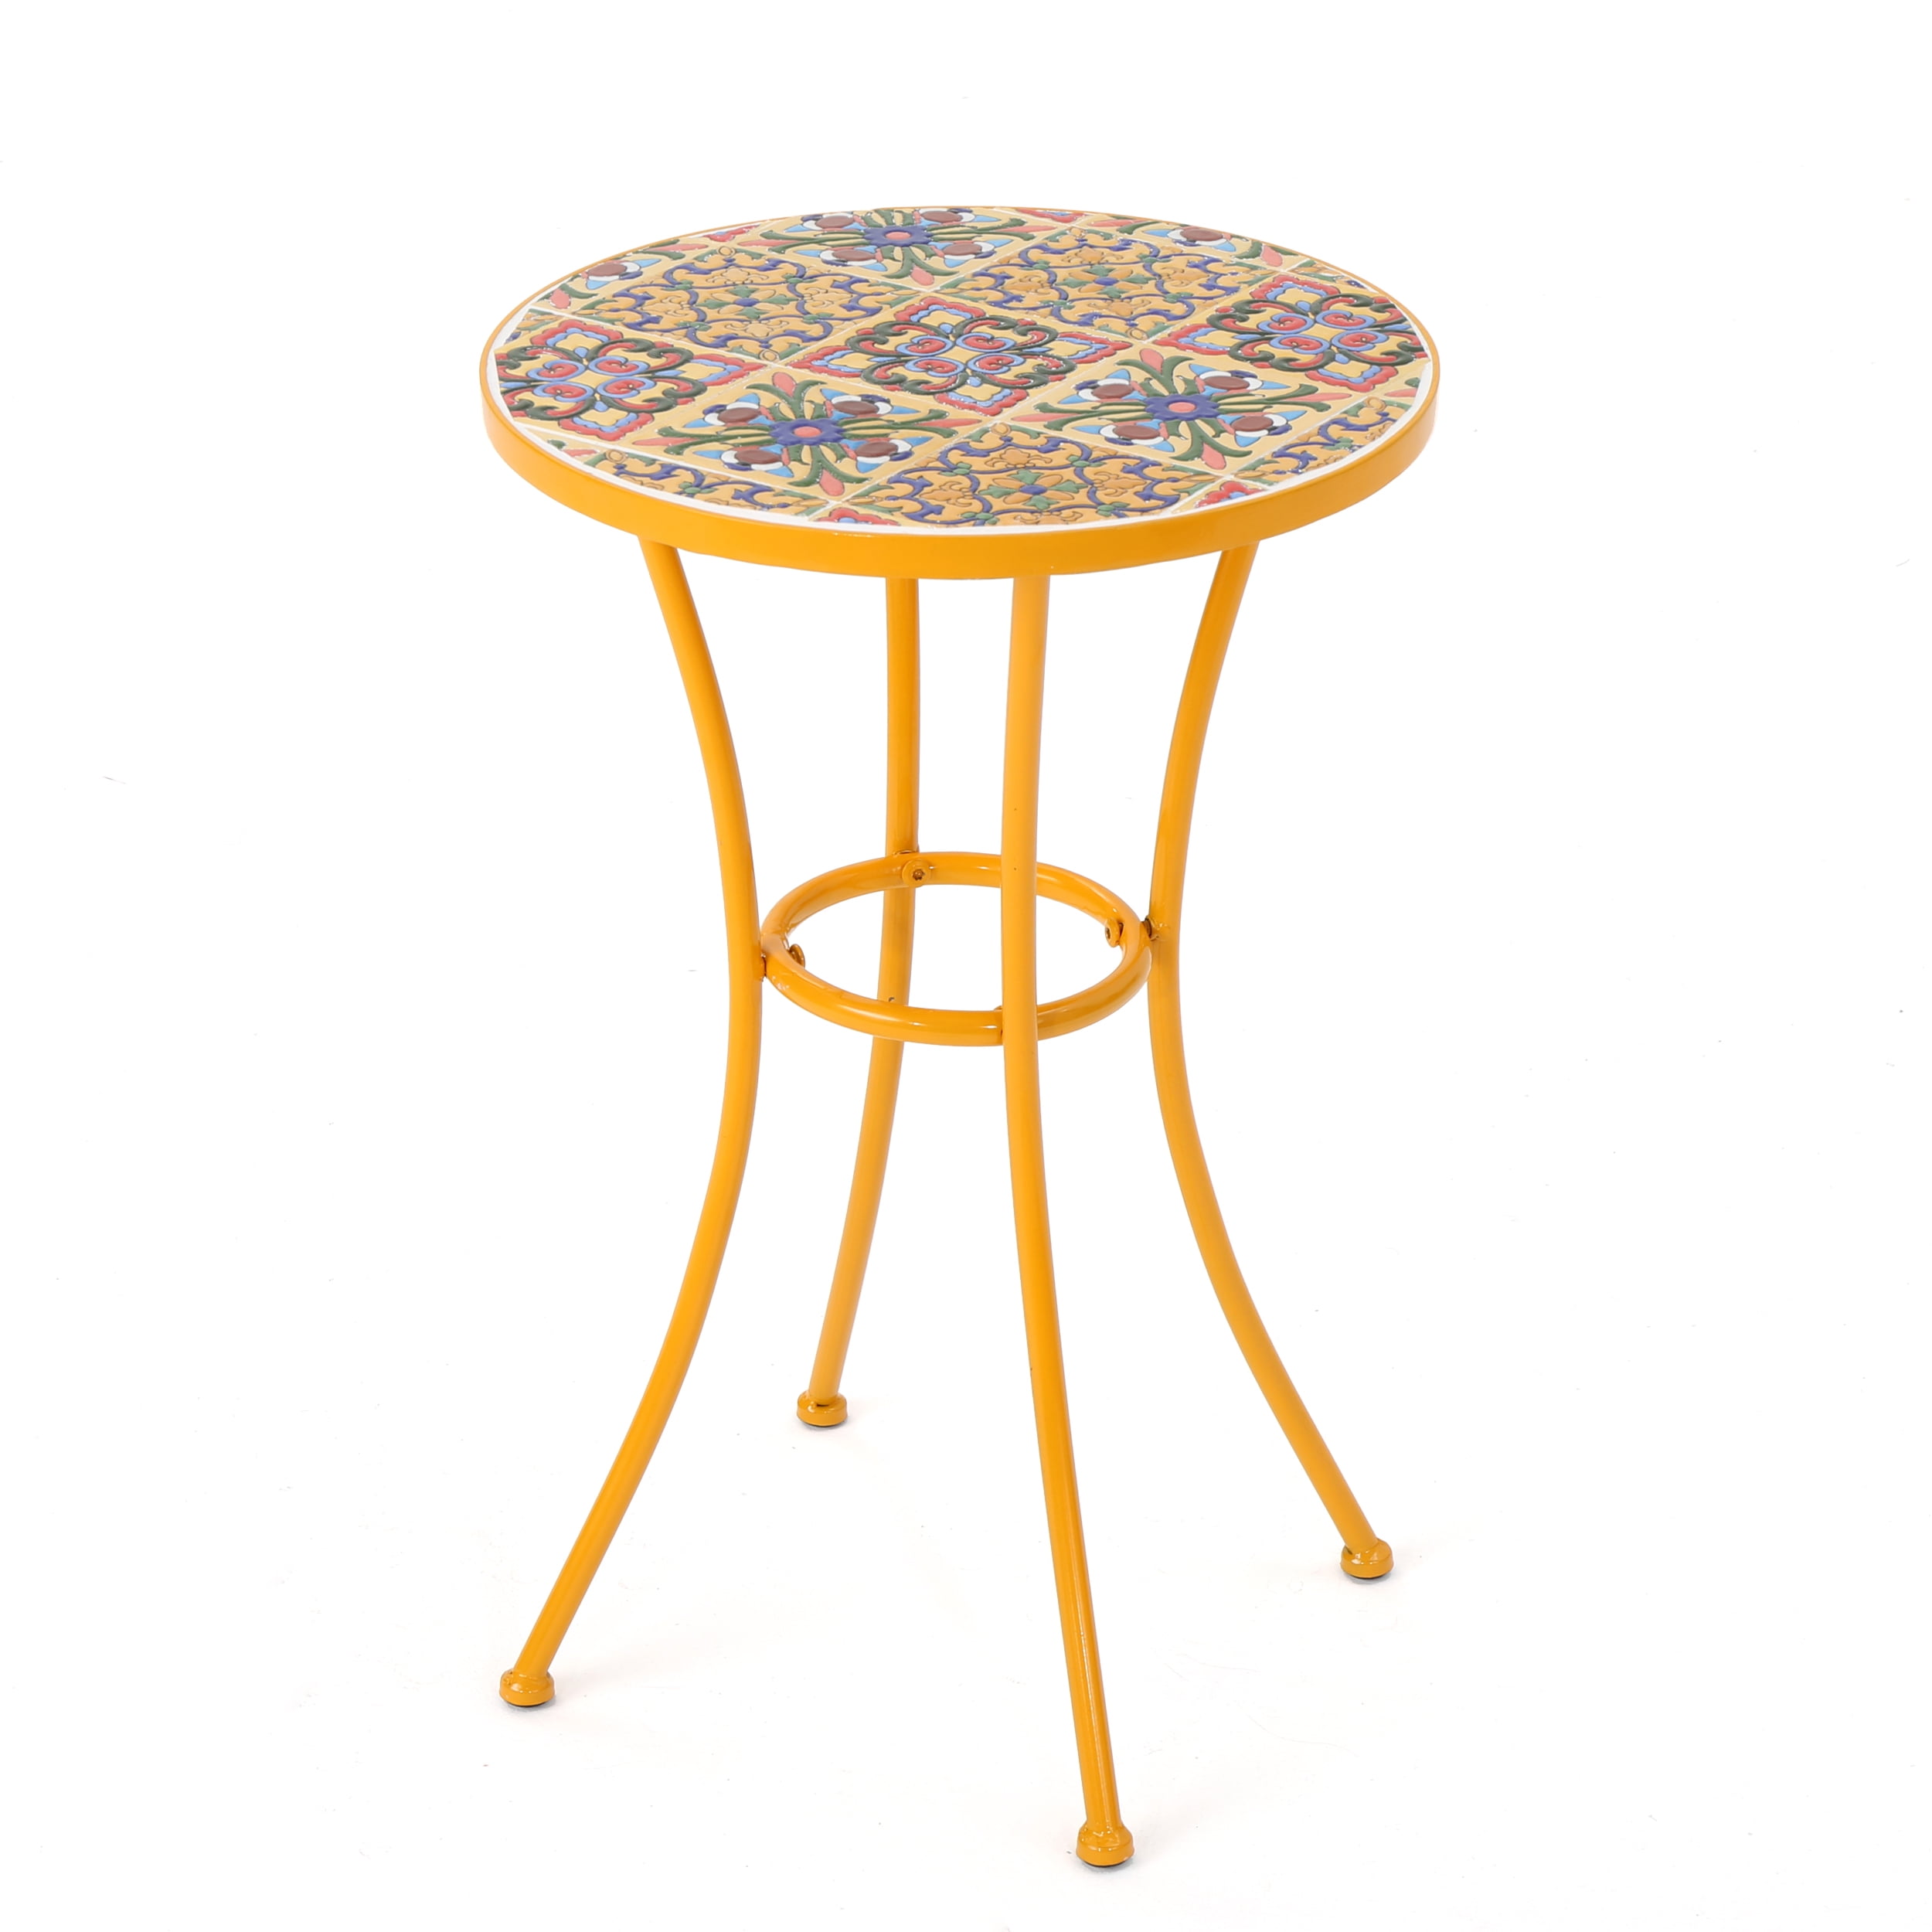 Brienne Outdoor Ceramic Tile Side Table with Iron Frame, Yellow